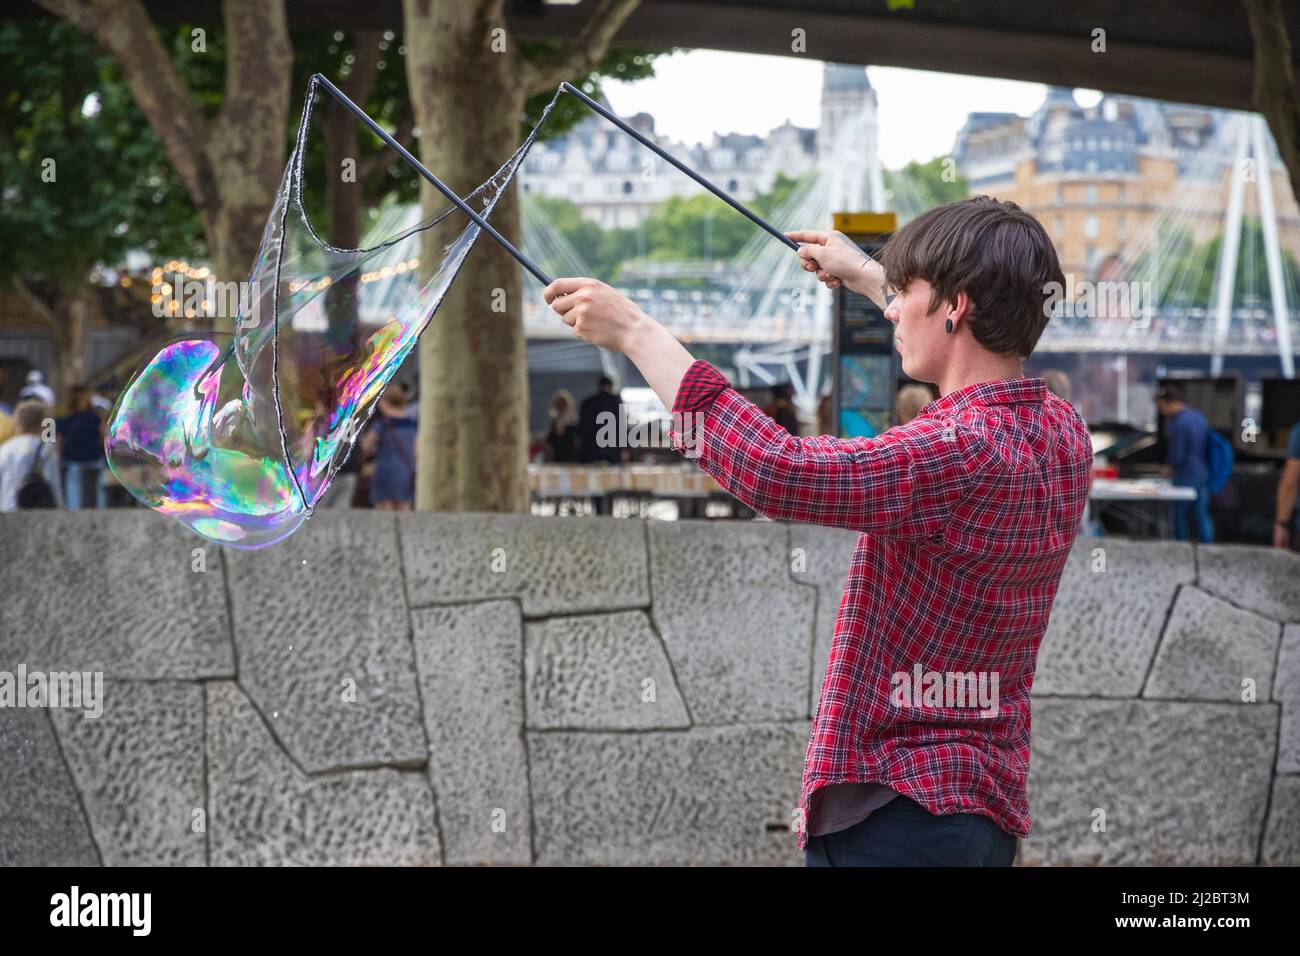 London, UK - 19 July, 2021 - A soap bubble street performer in South Bank area Stock Photo